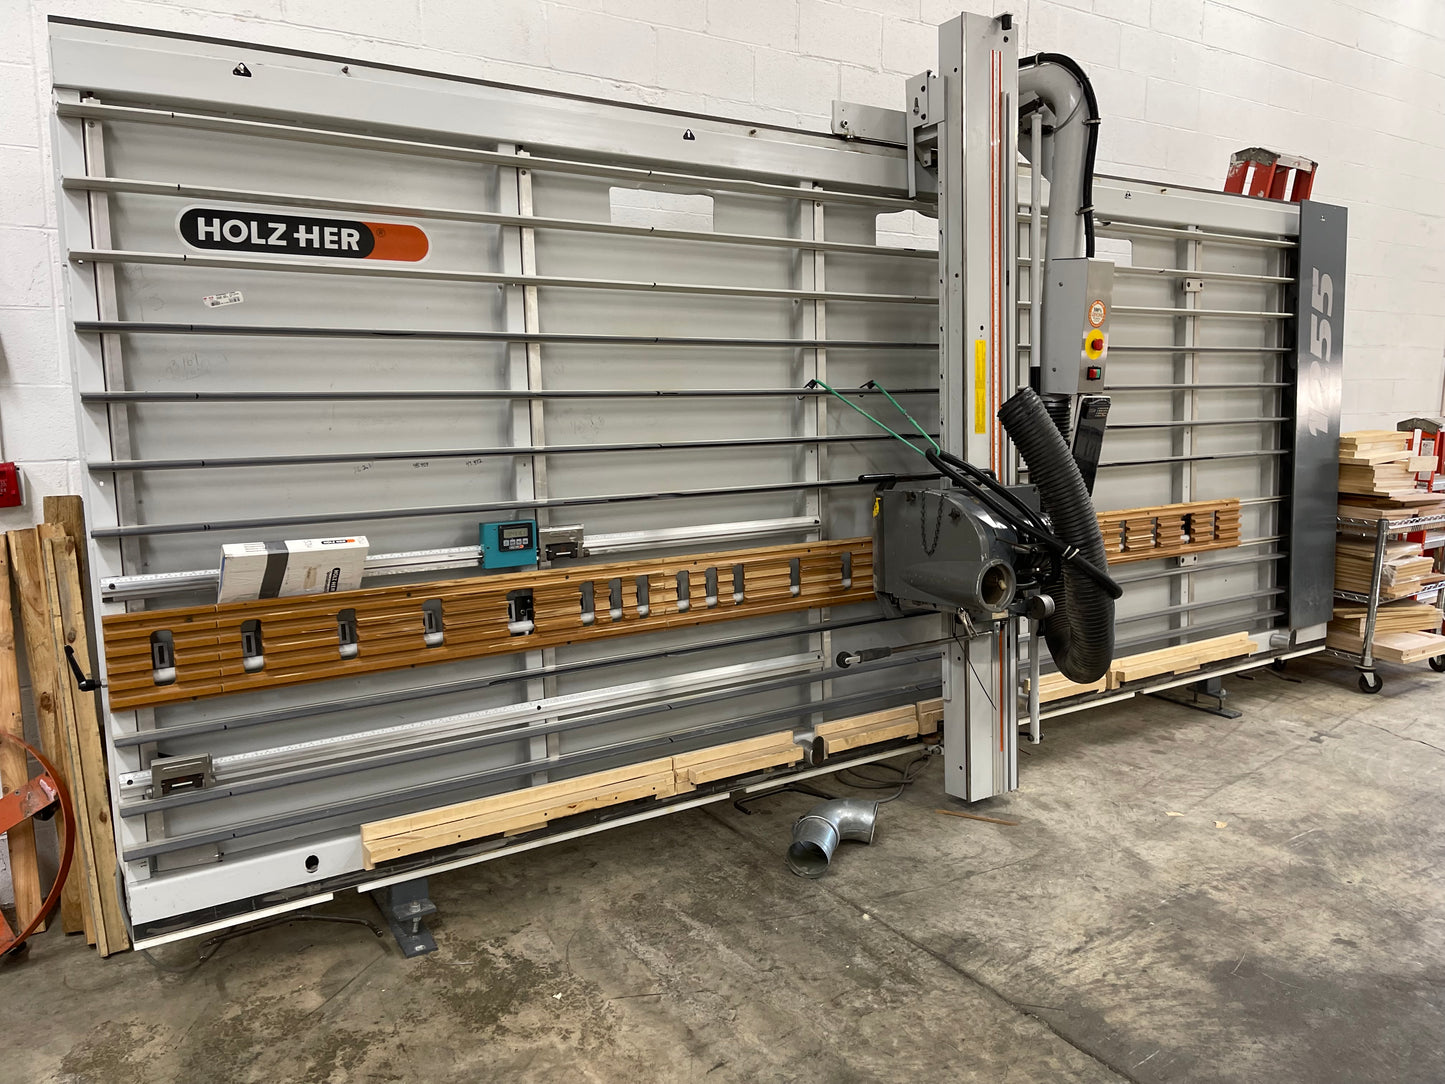 Holzher Vertical Saw 1255- Reconditioned - Illinois